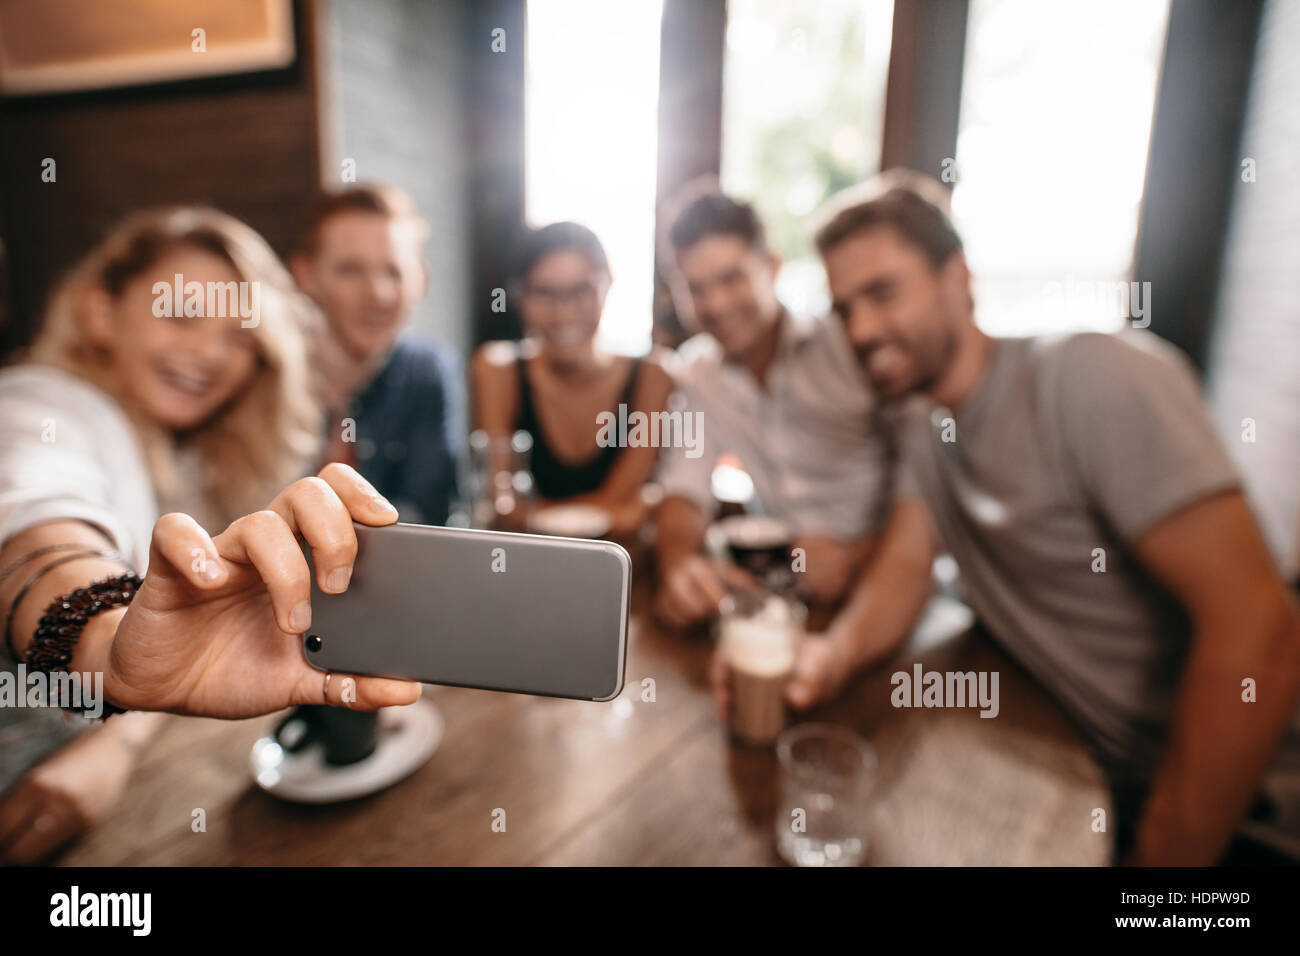 Group of young people taking a selfie at cafe. Young friends at restaurant taking self portrait. Stock Photo